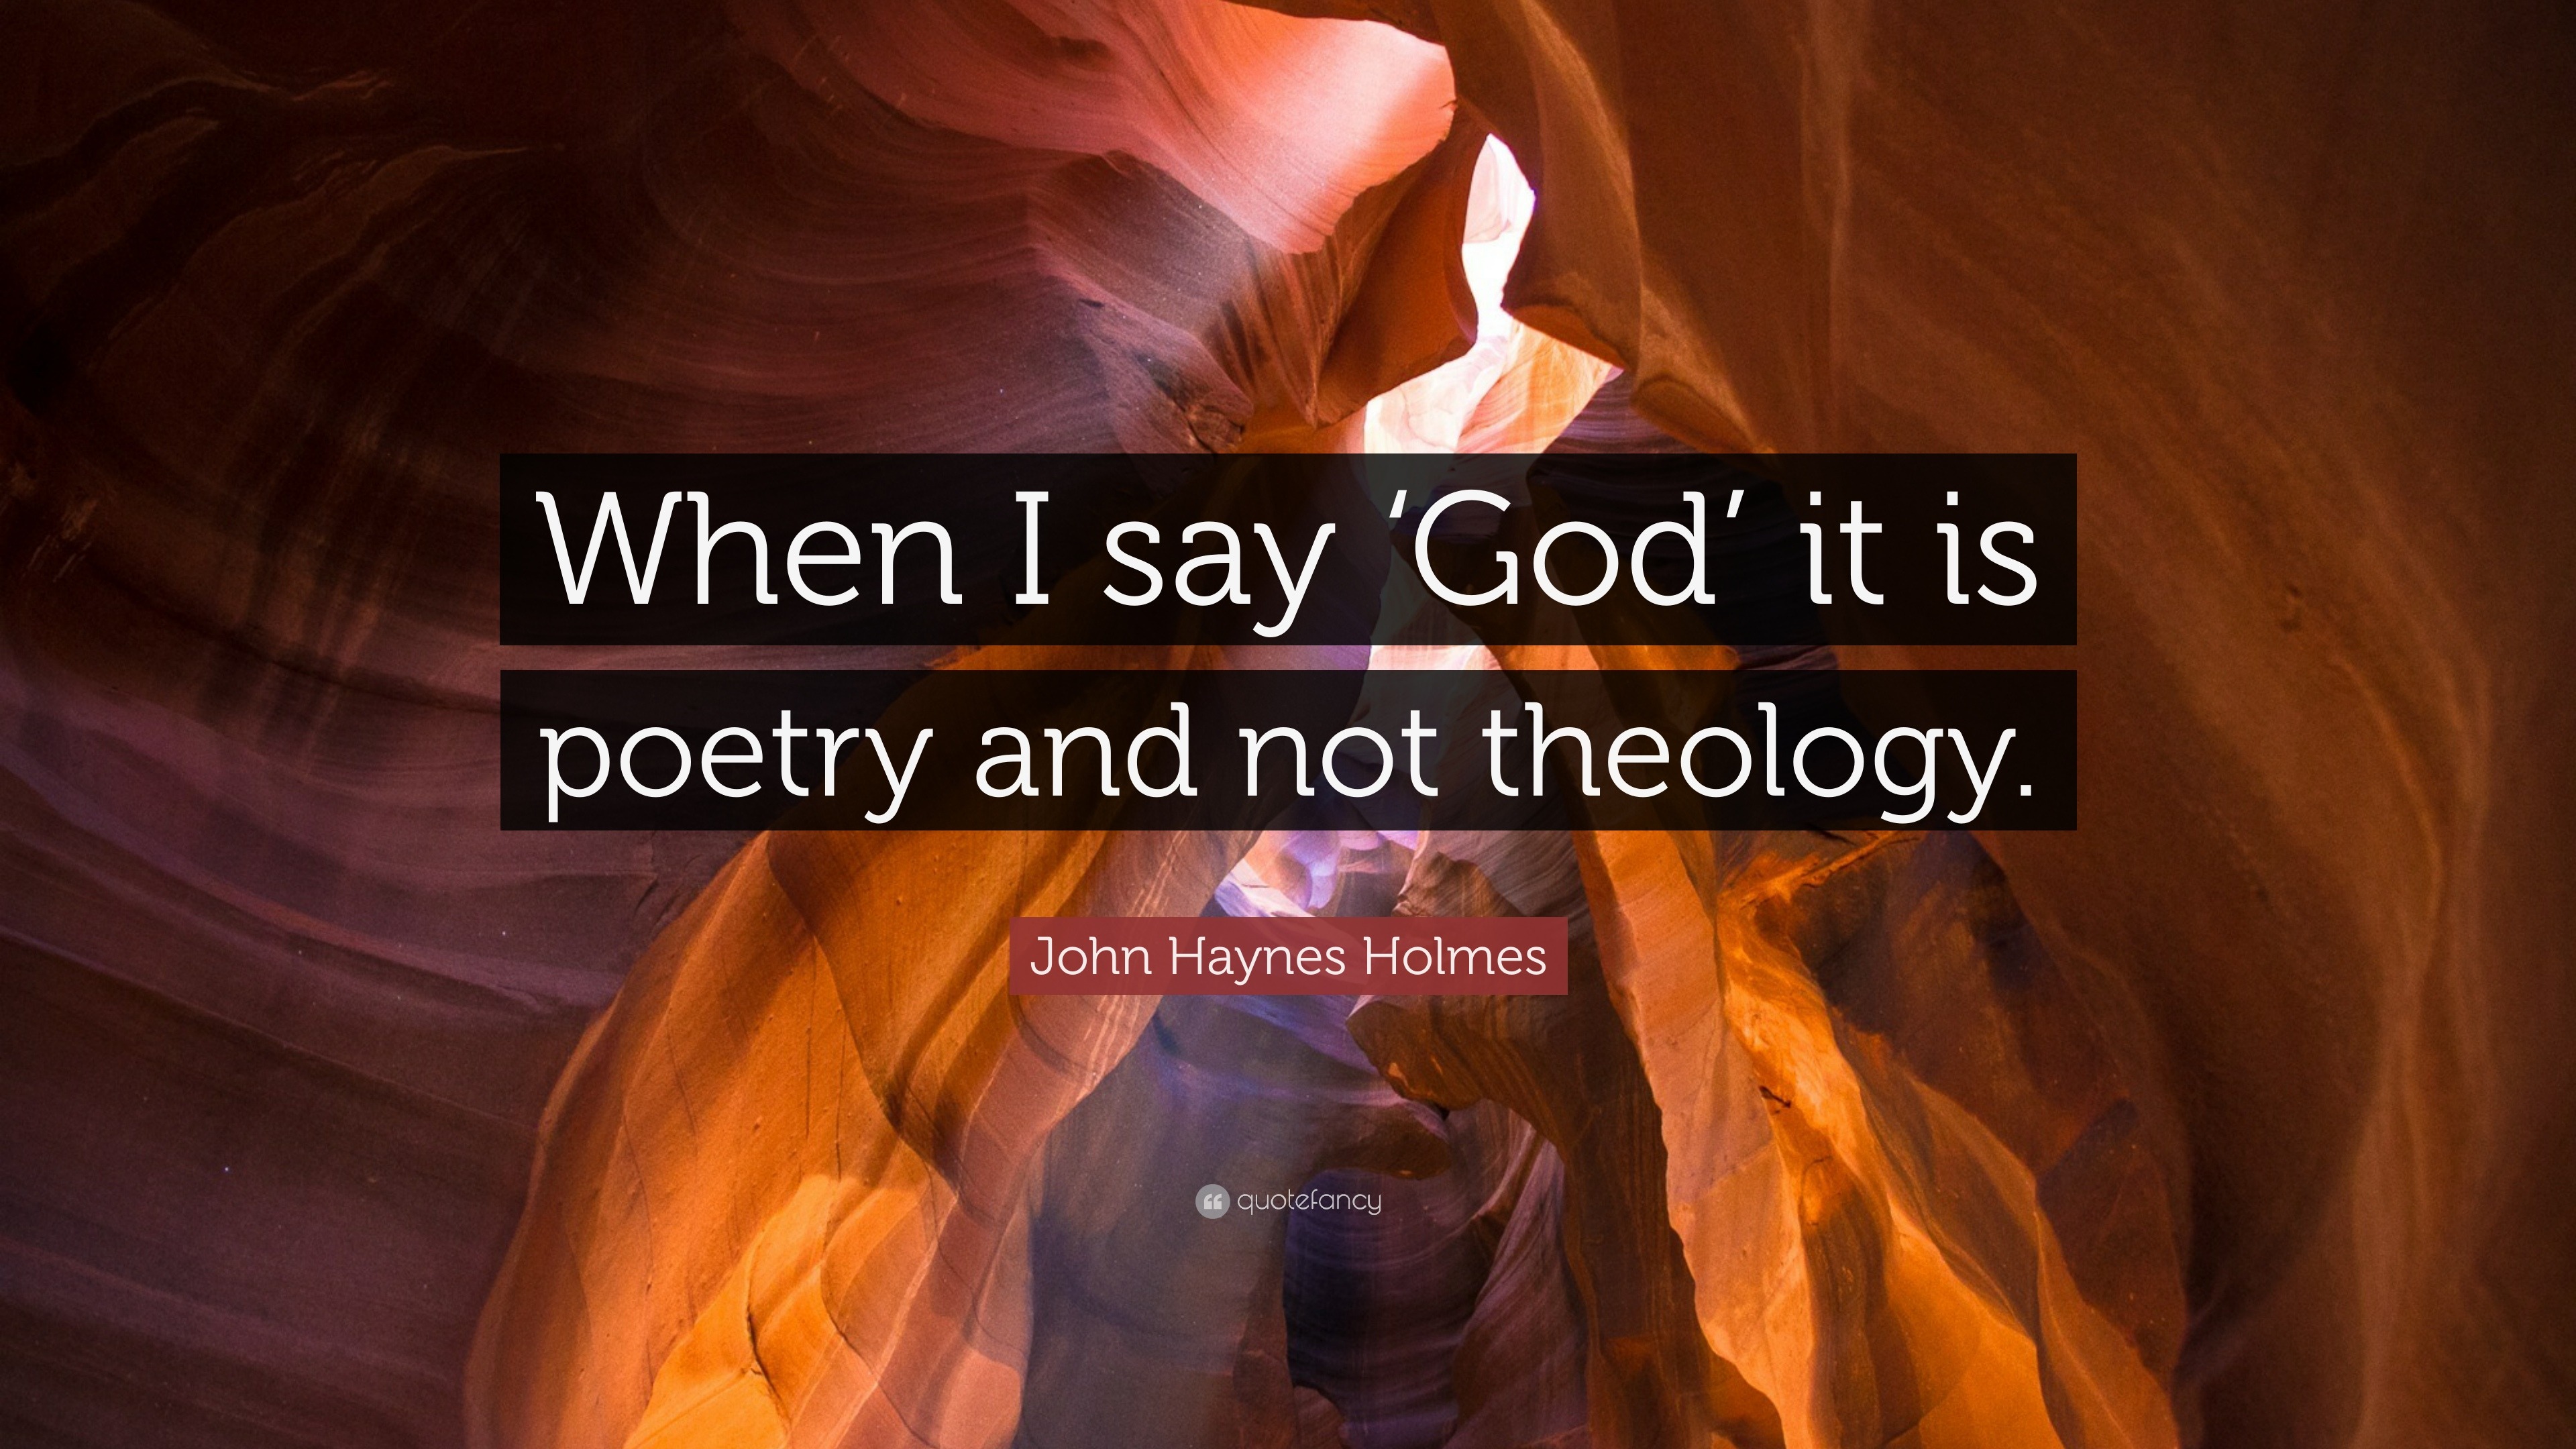 John Haynes Holmes Quote: "When I say 'God' it is poetry ...